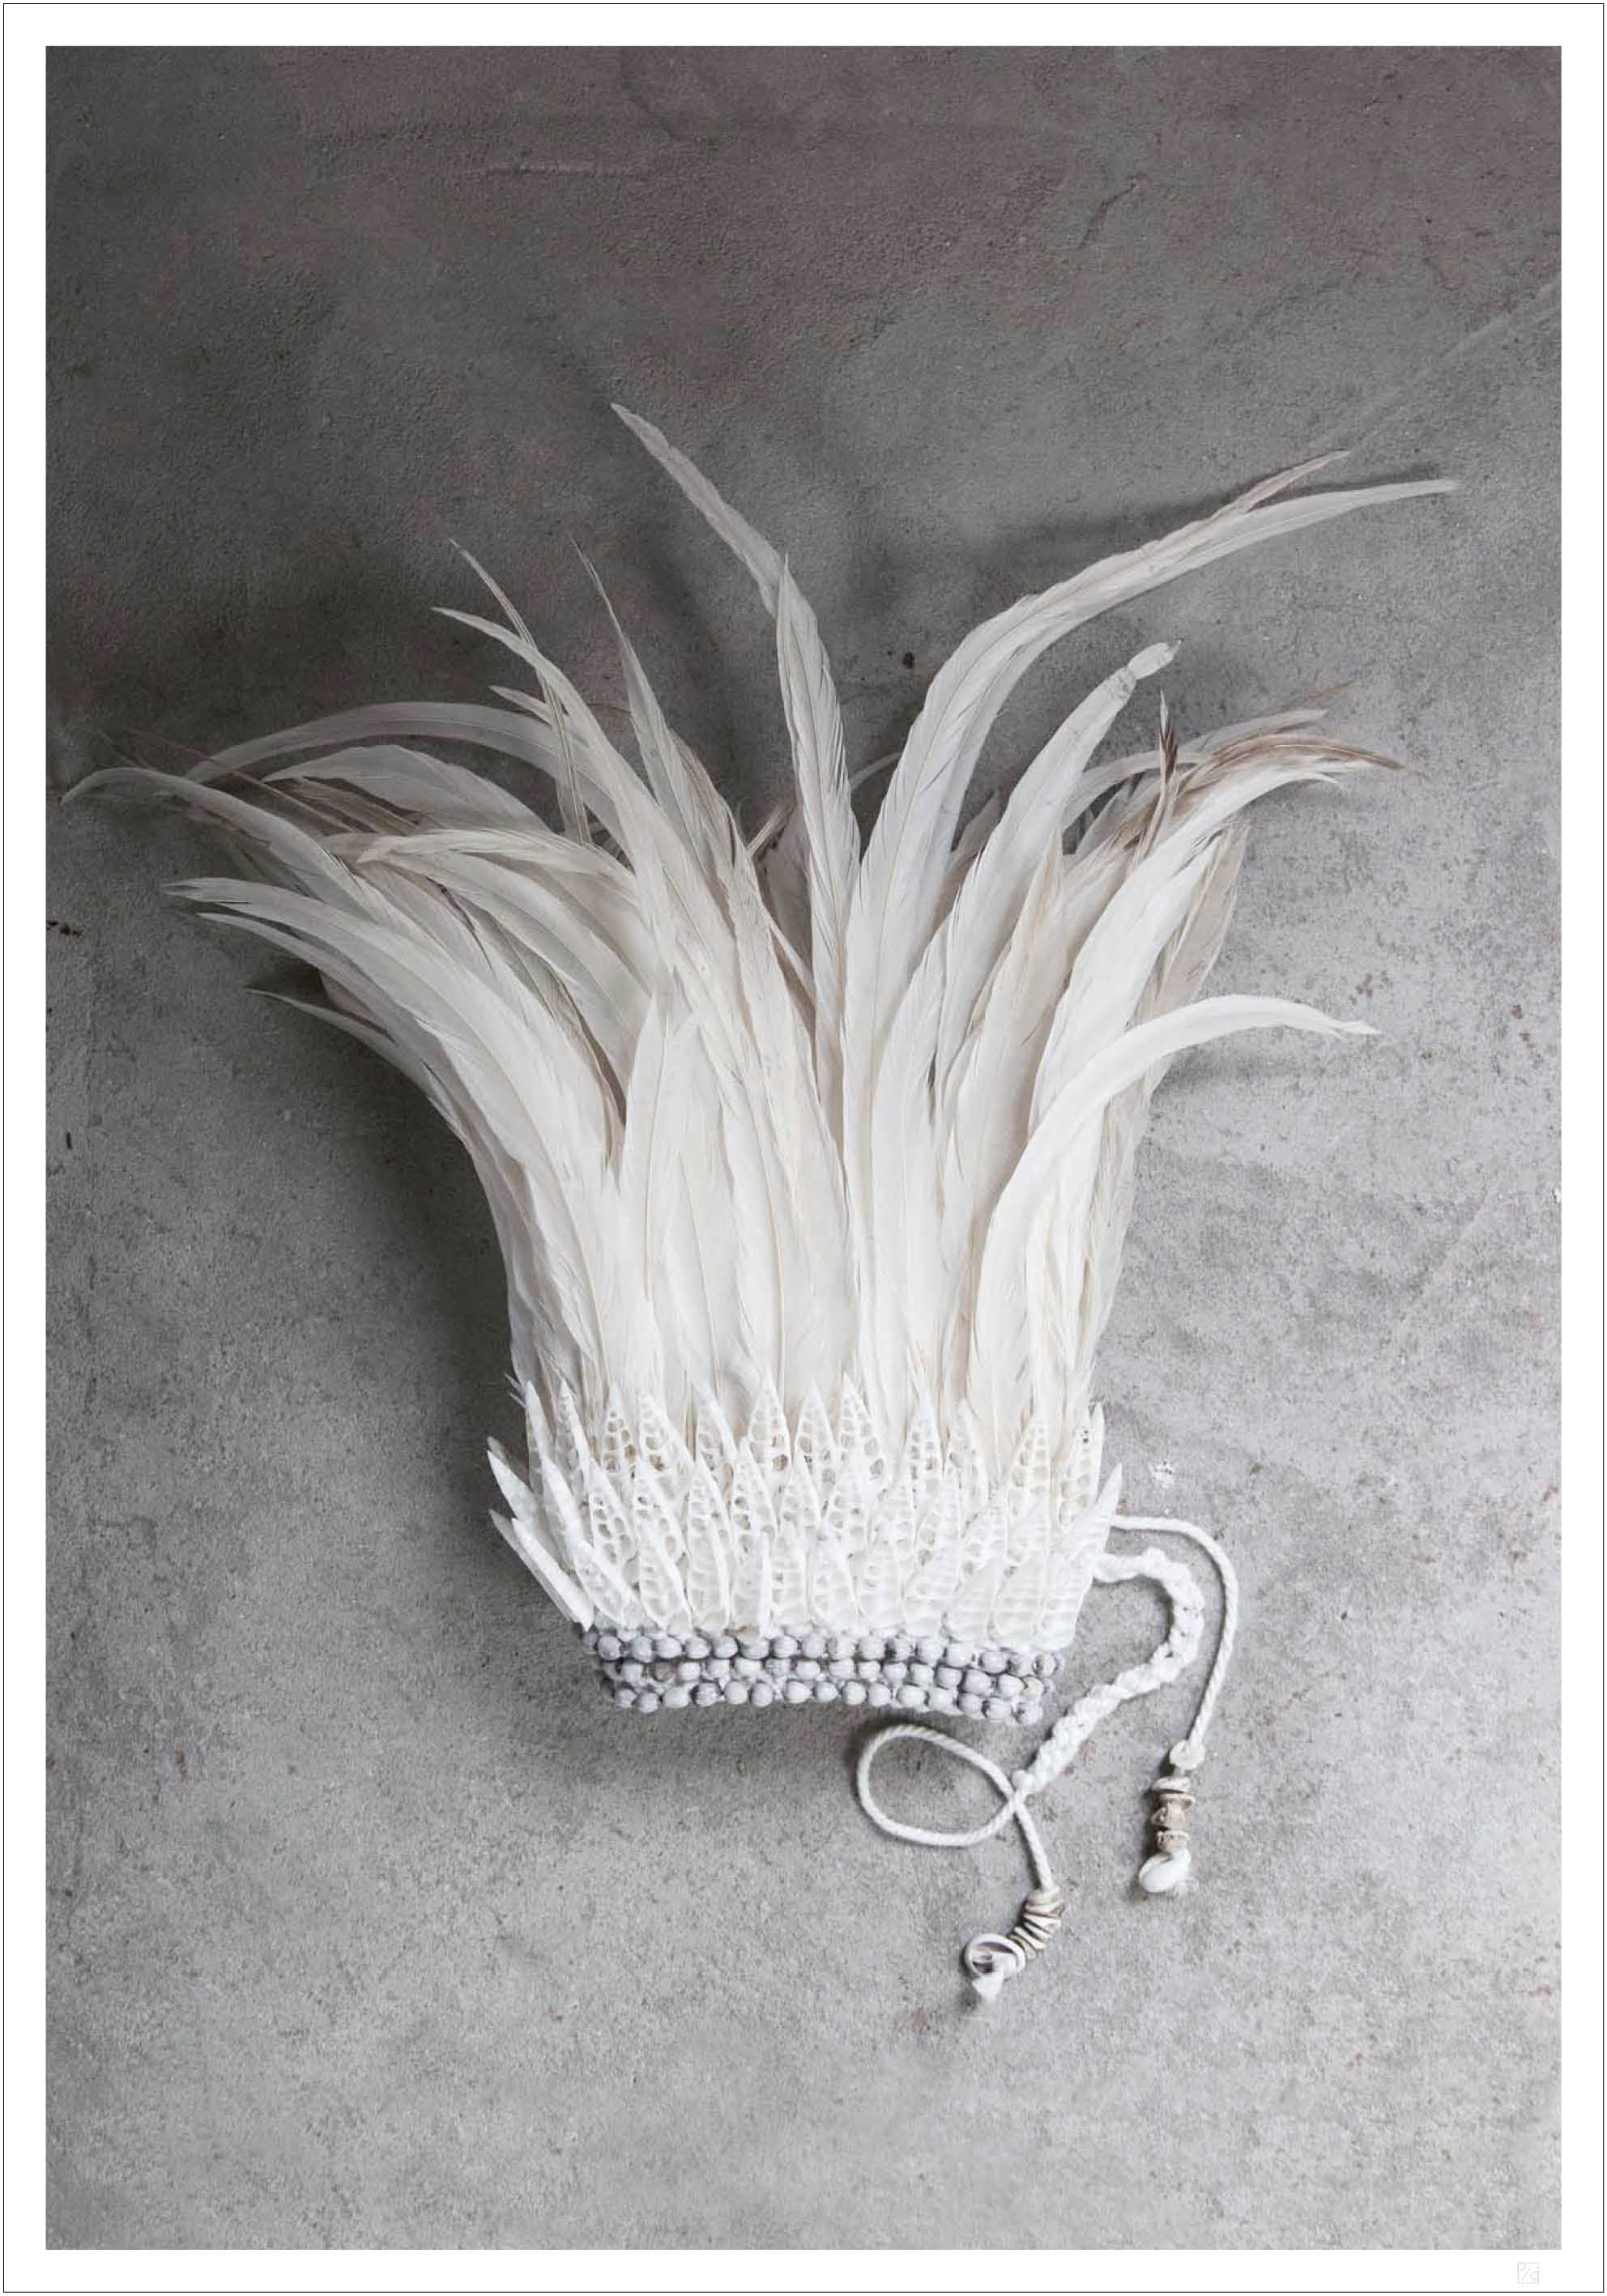 A cron made out of white feathers and you get White feather crown poster